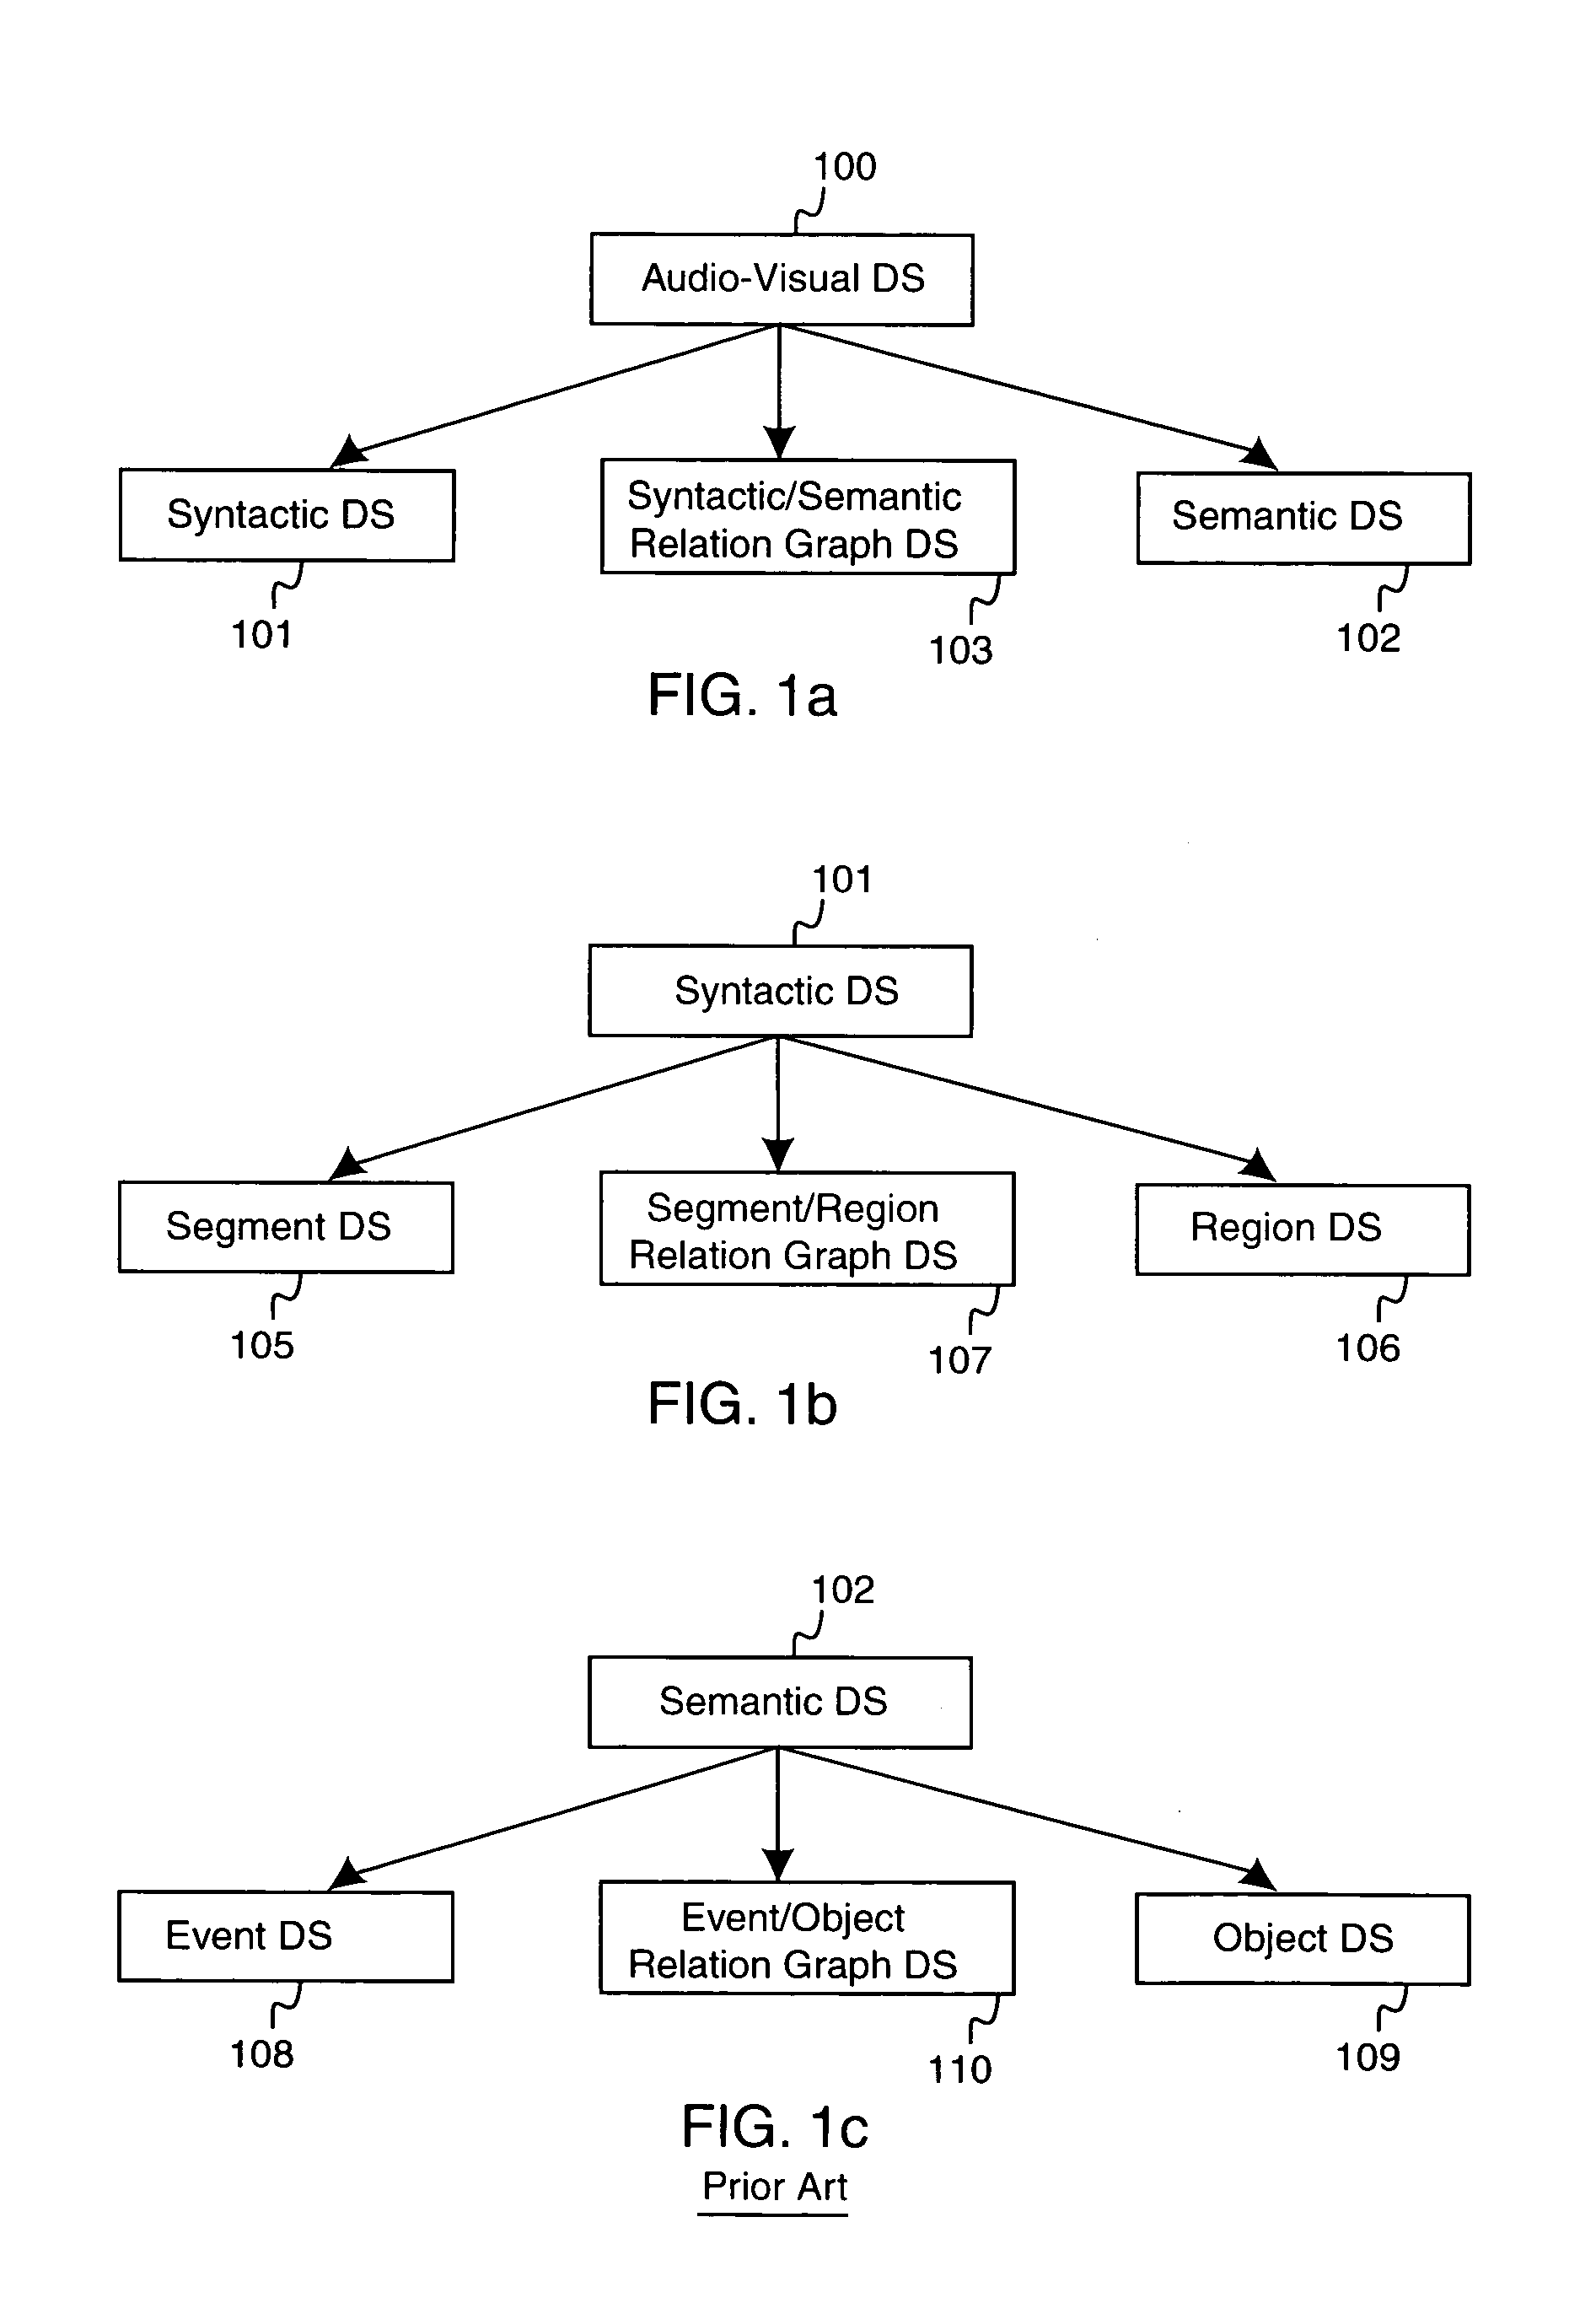 Method for representing and comparing multimedia content according to rank